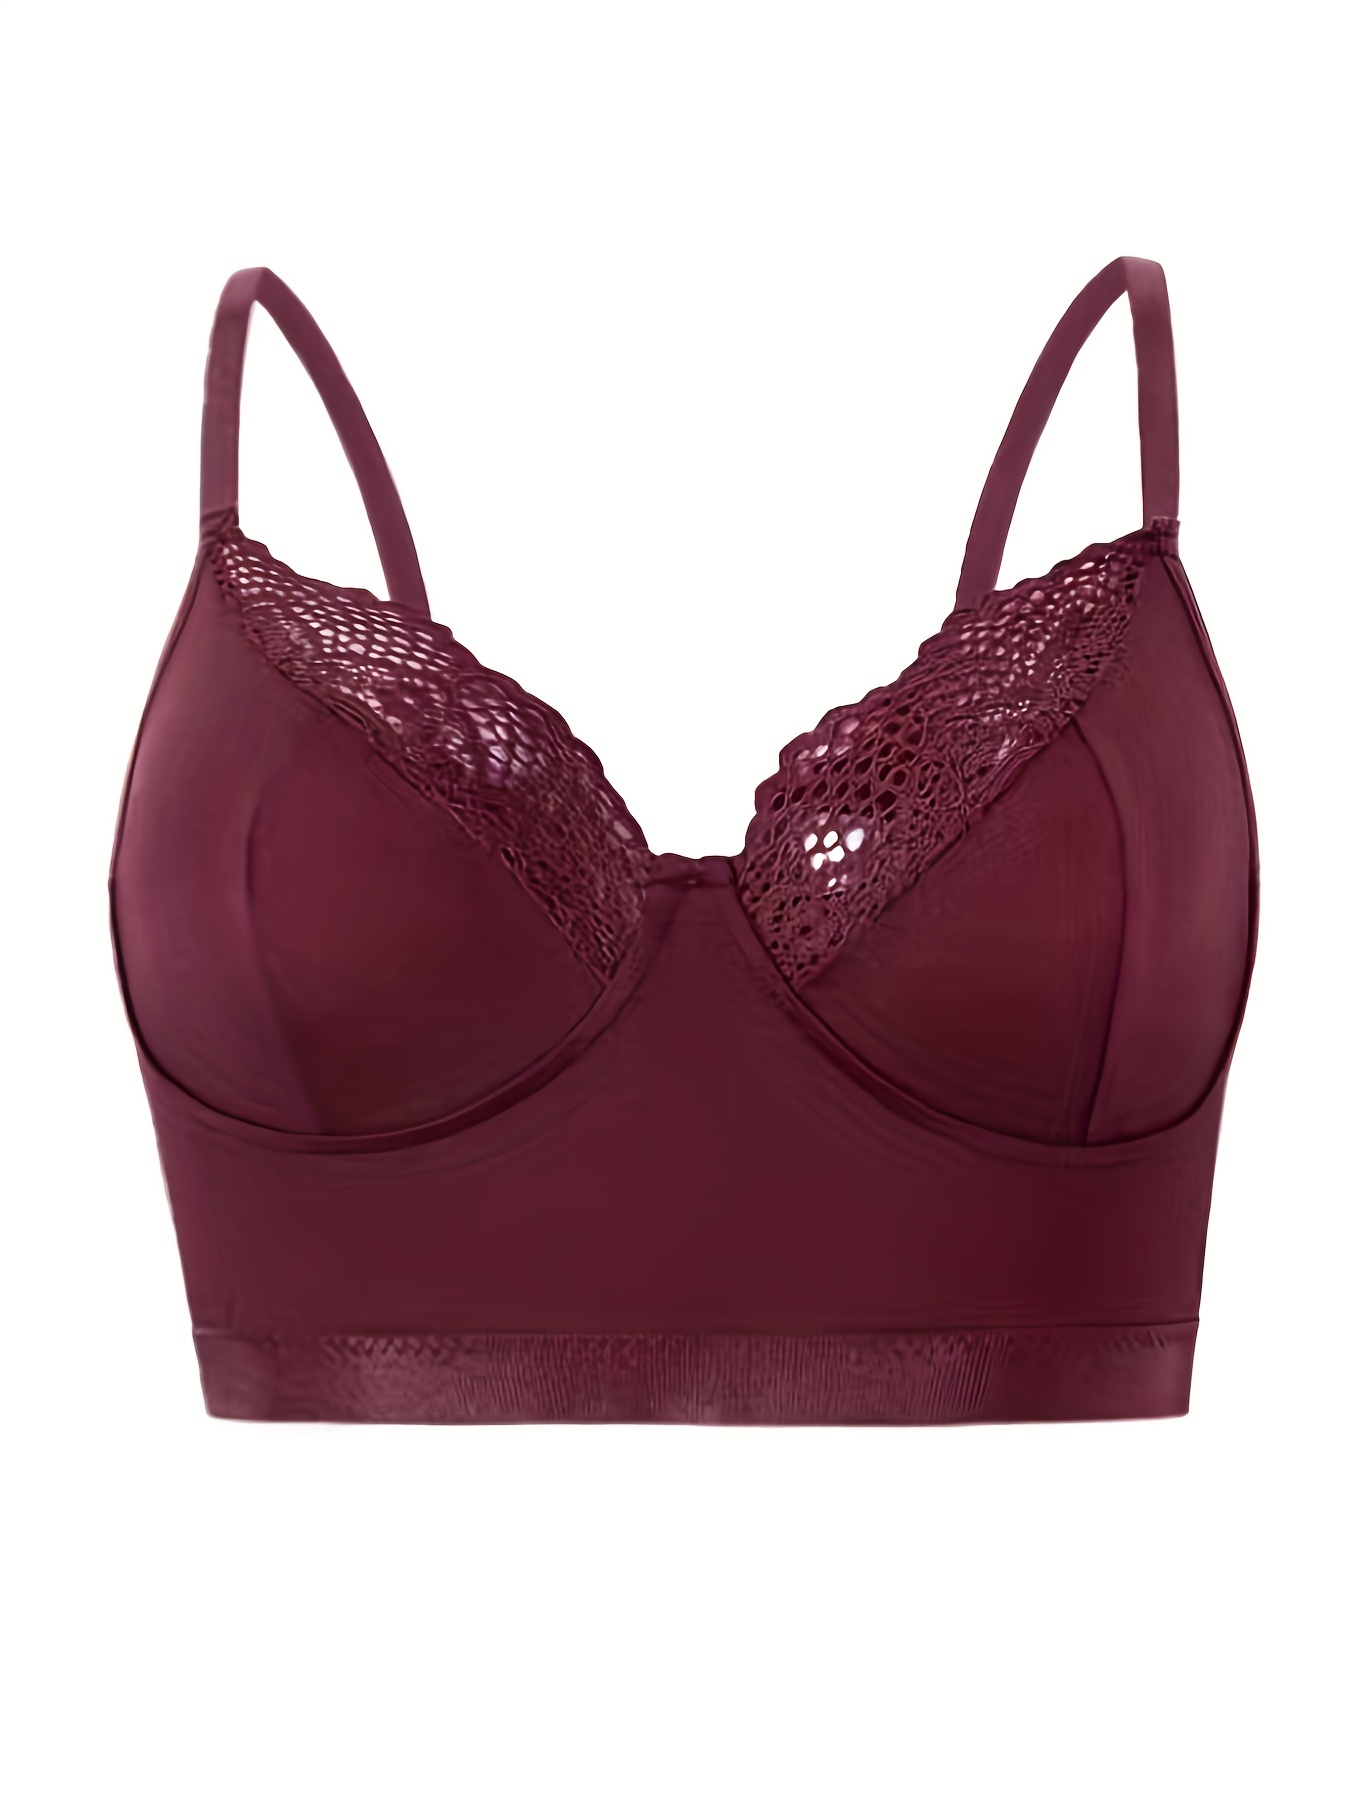 Plus Size Sexy Bra, Women's Plus Contrast Lace Wireless Full Cup Non Padded  Bralette